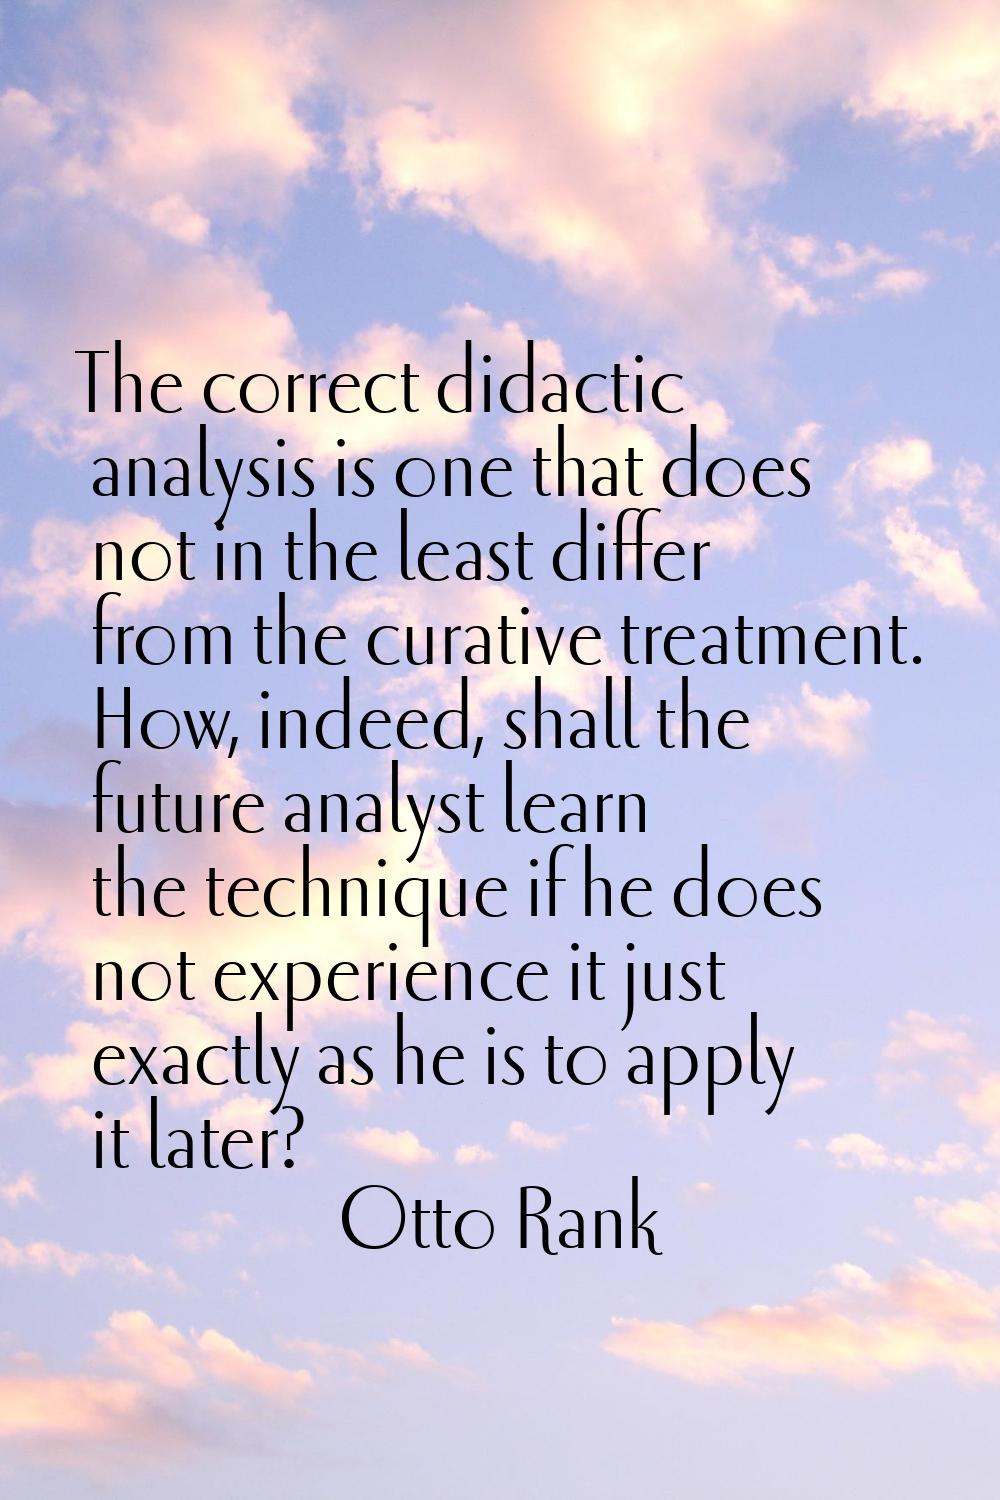 The correct didactic analysis is one that does not in the least differ from the curative treatment.